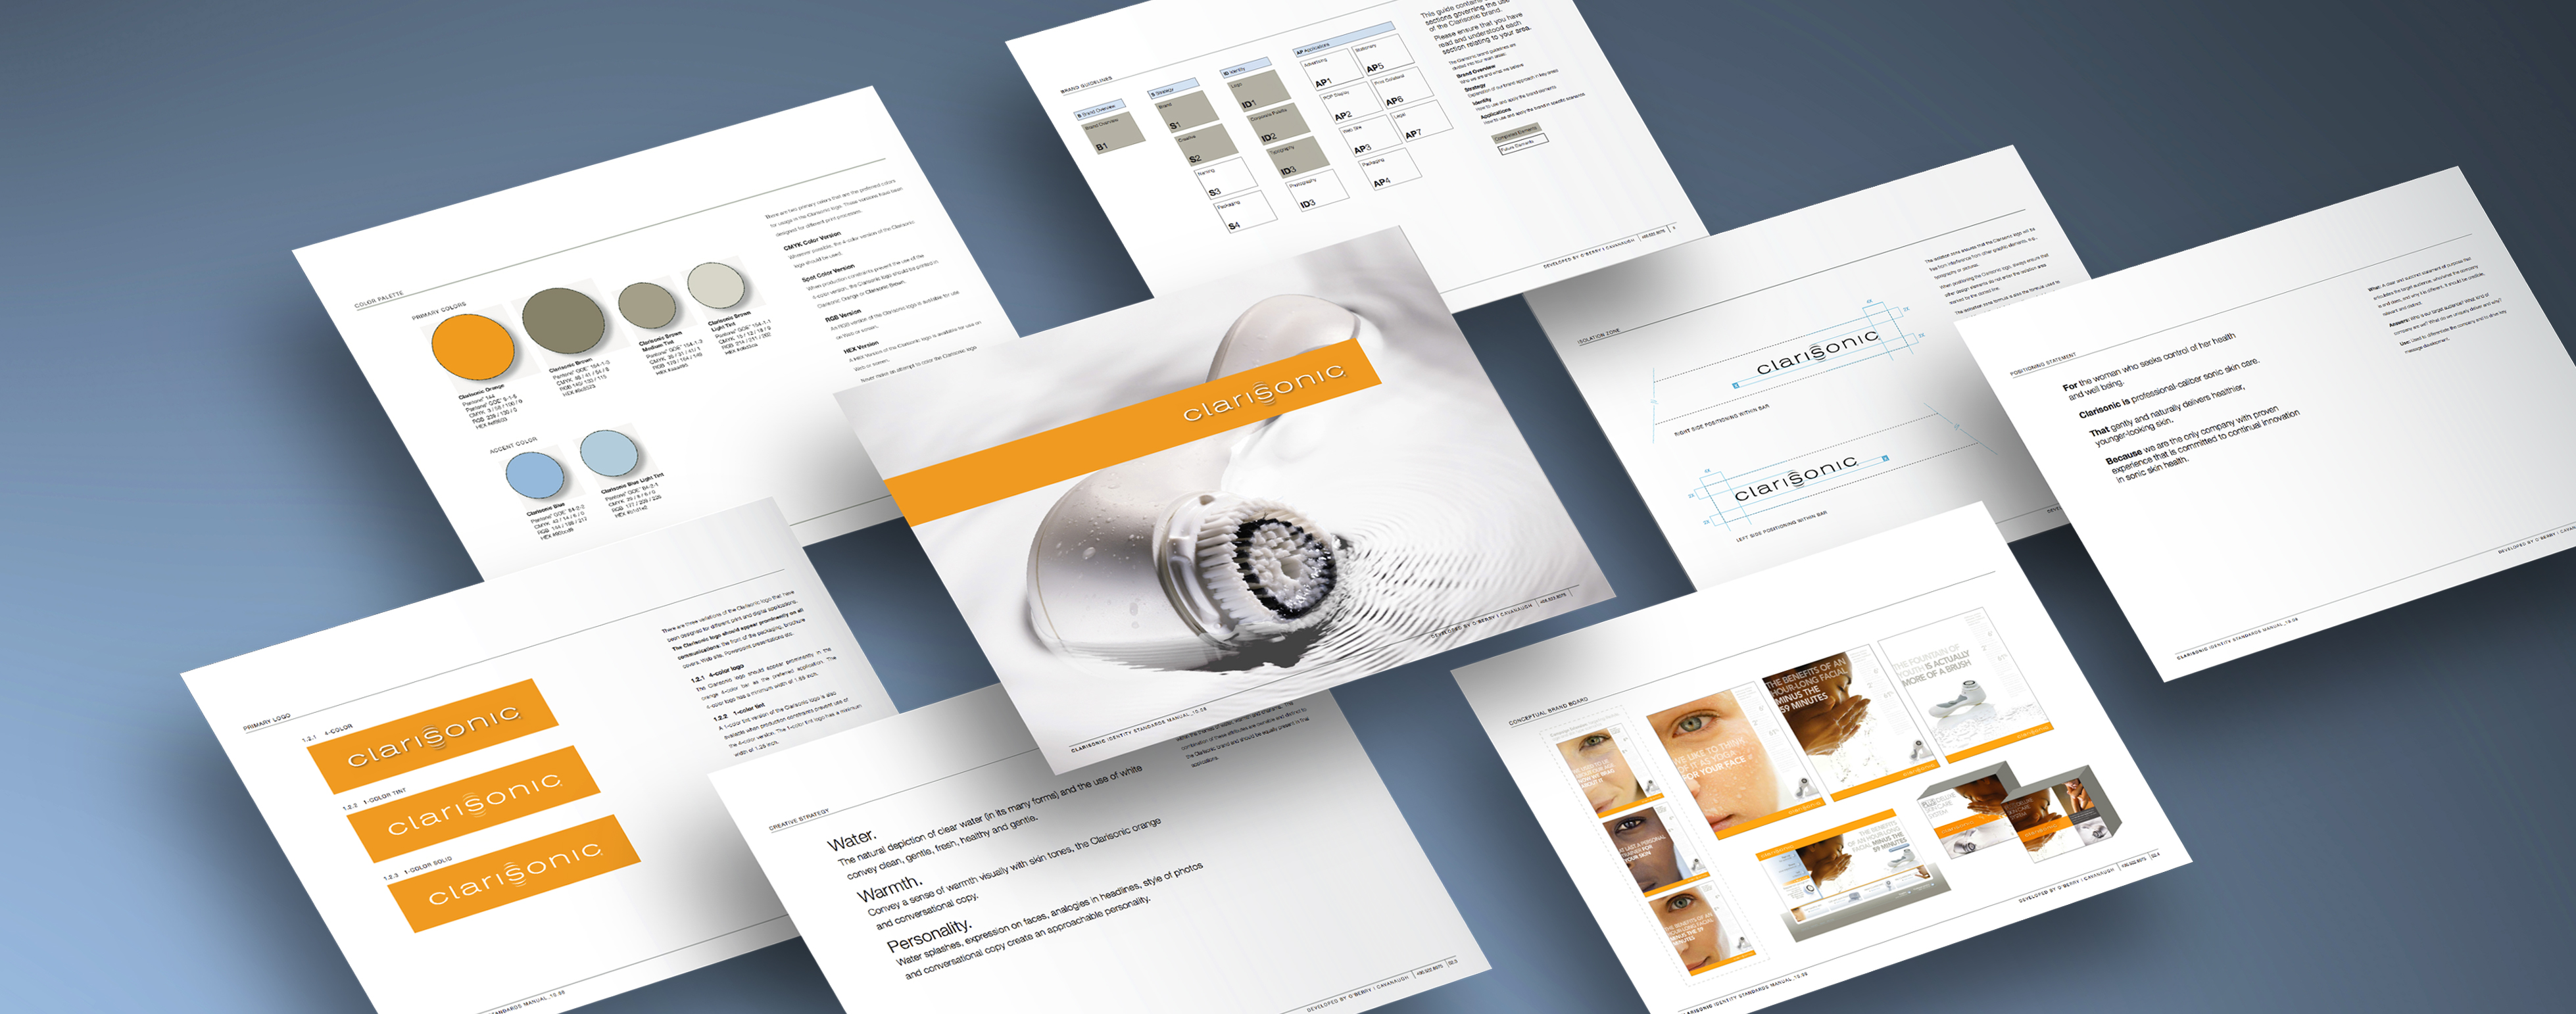 O’Berry Collaborative developed the Clarisonic brand strategy, including messaging, positioning, tone and manner, creative strategy, and brand guidelines.